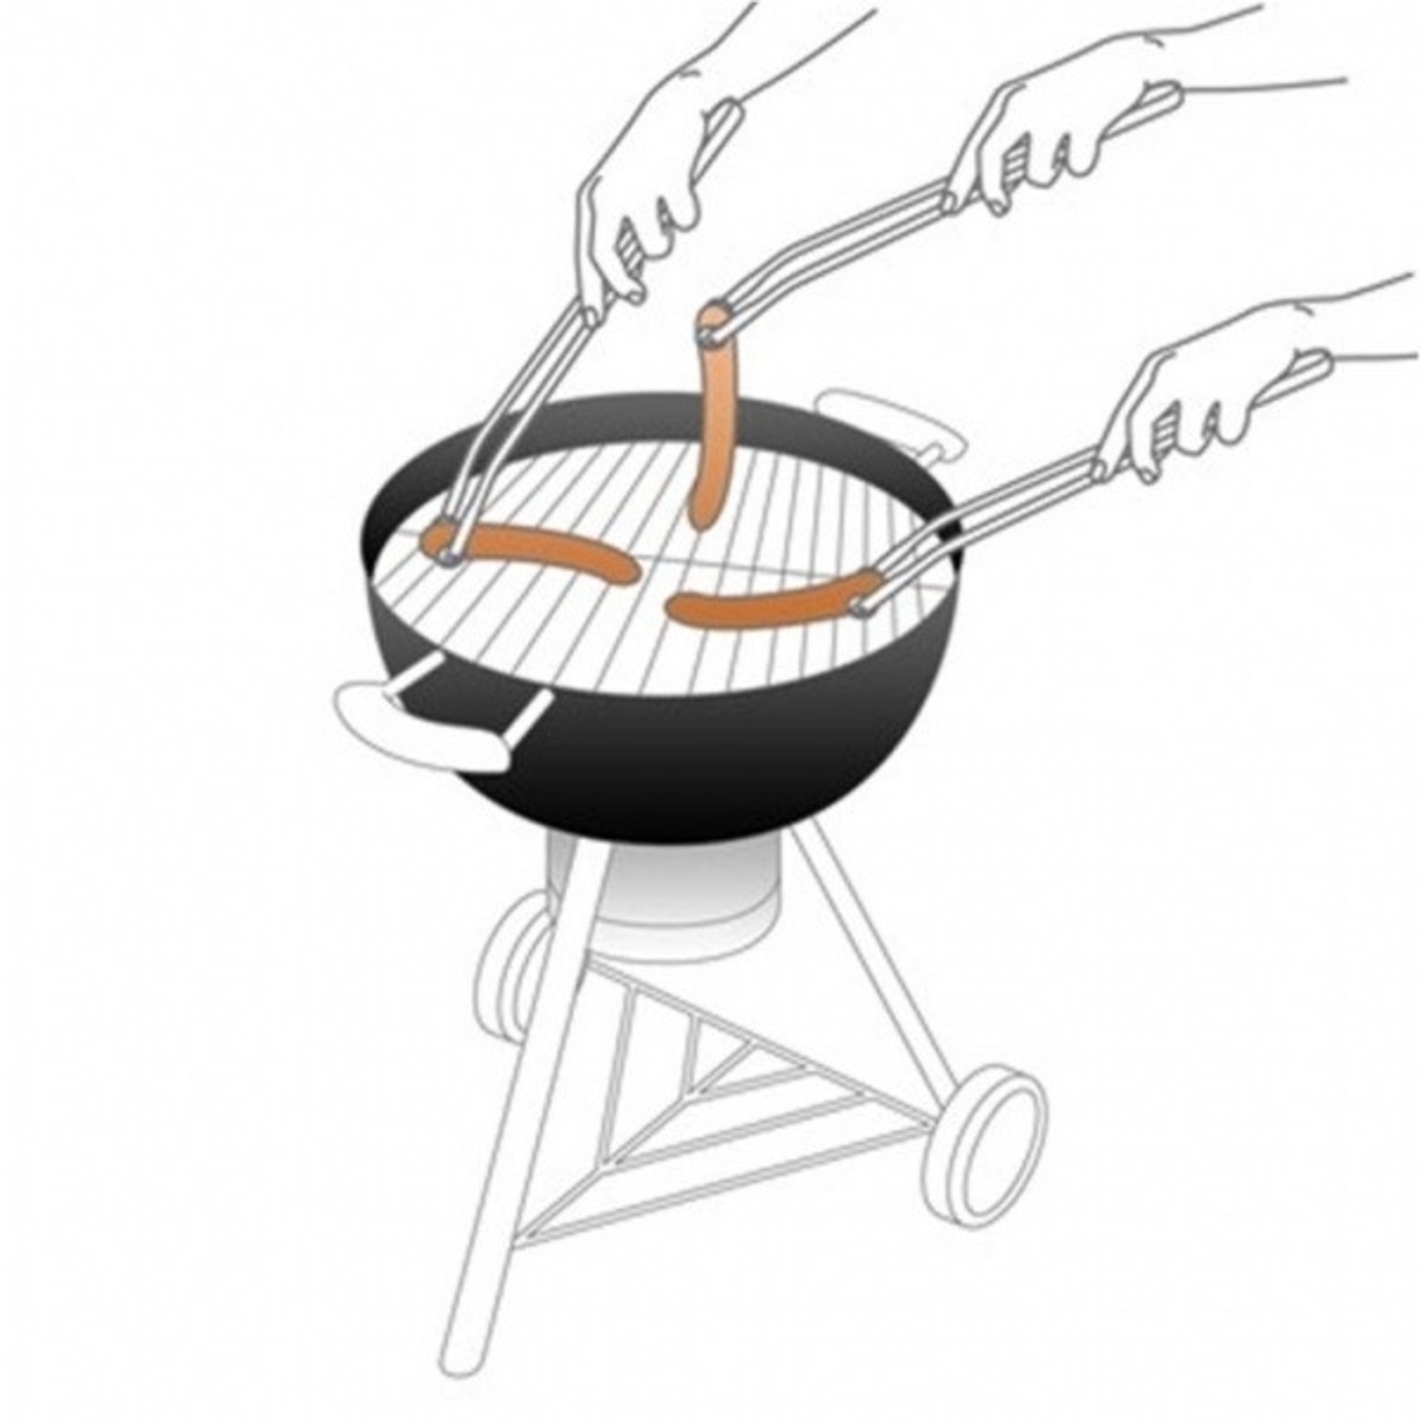 https://www.esprit-barbecue.fr/3014-thickbox_default/pince-grill-up-barbecue-40cm.jpg